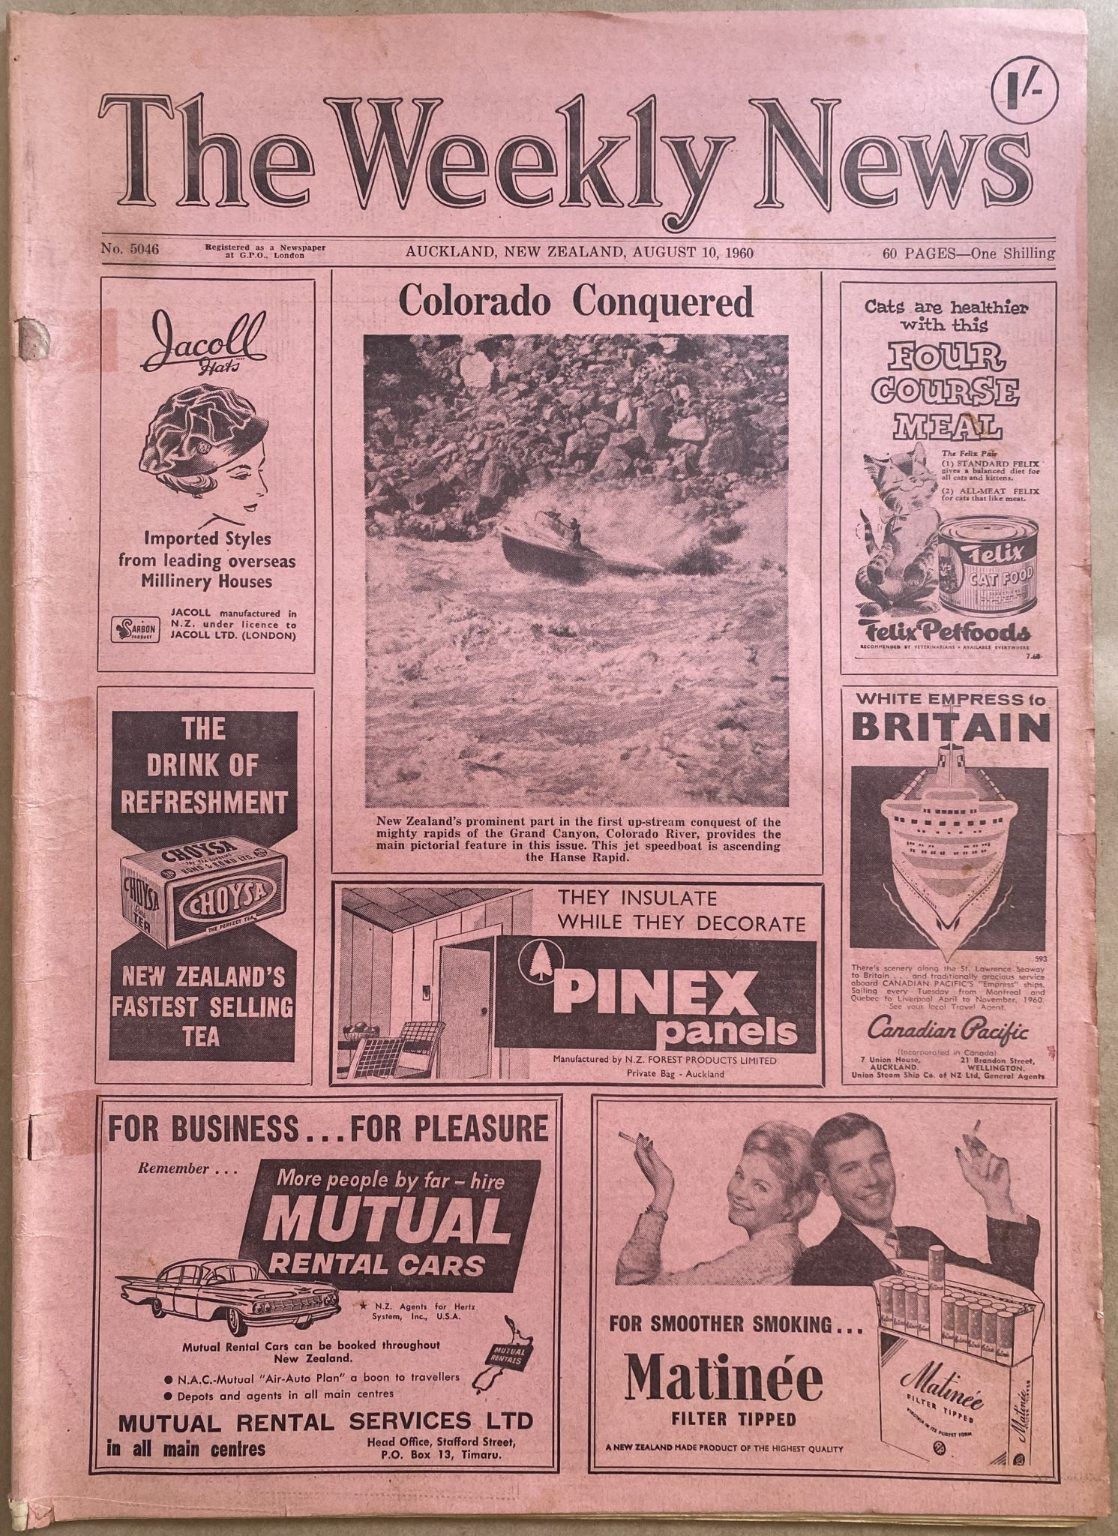 OLD NEWSPAPER: The Weekly News, No. 5046, 10 August 1960